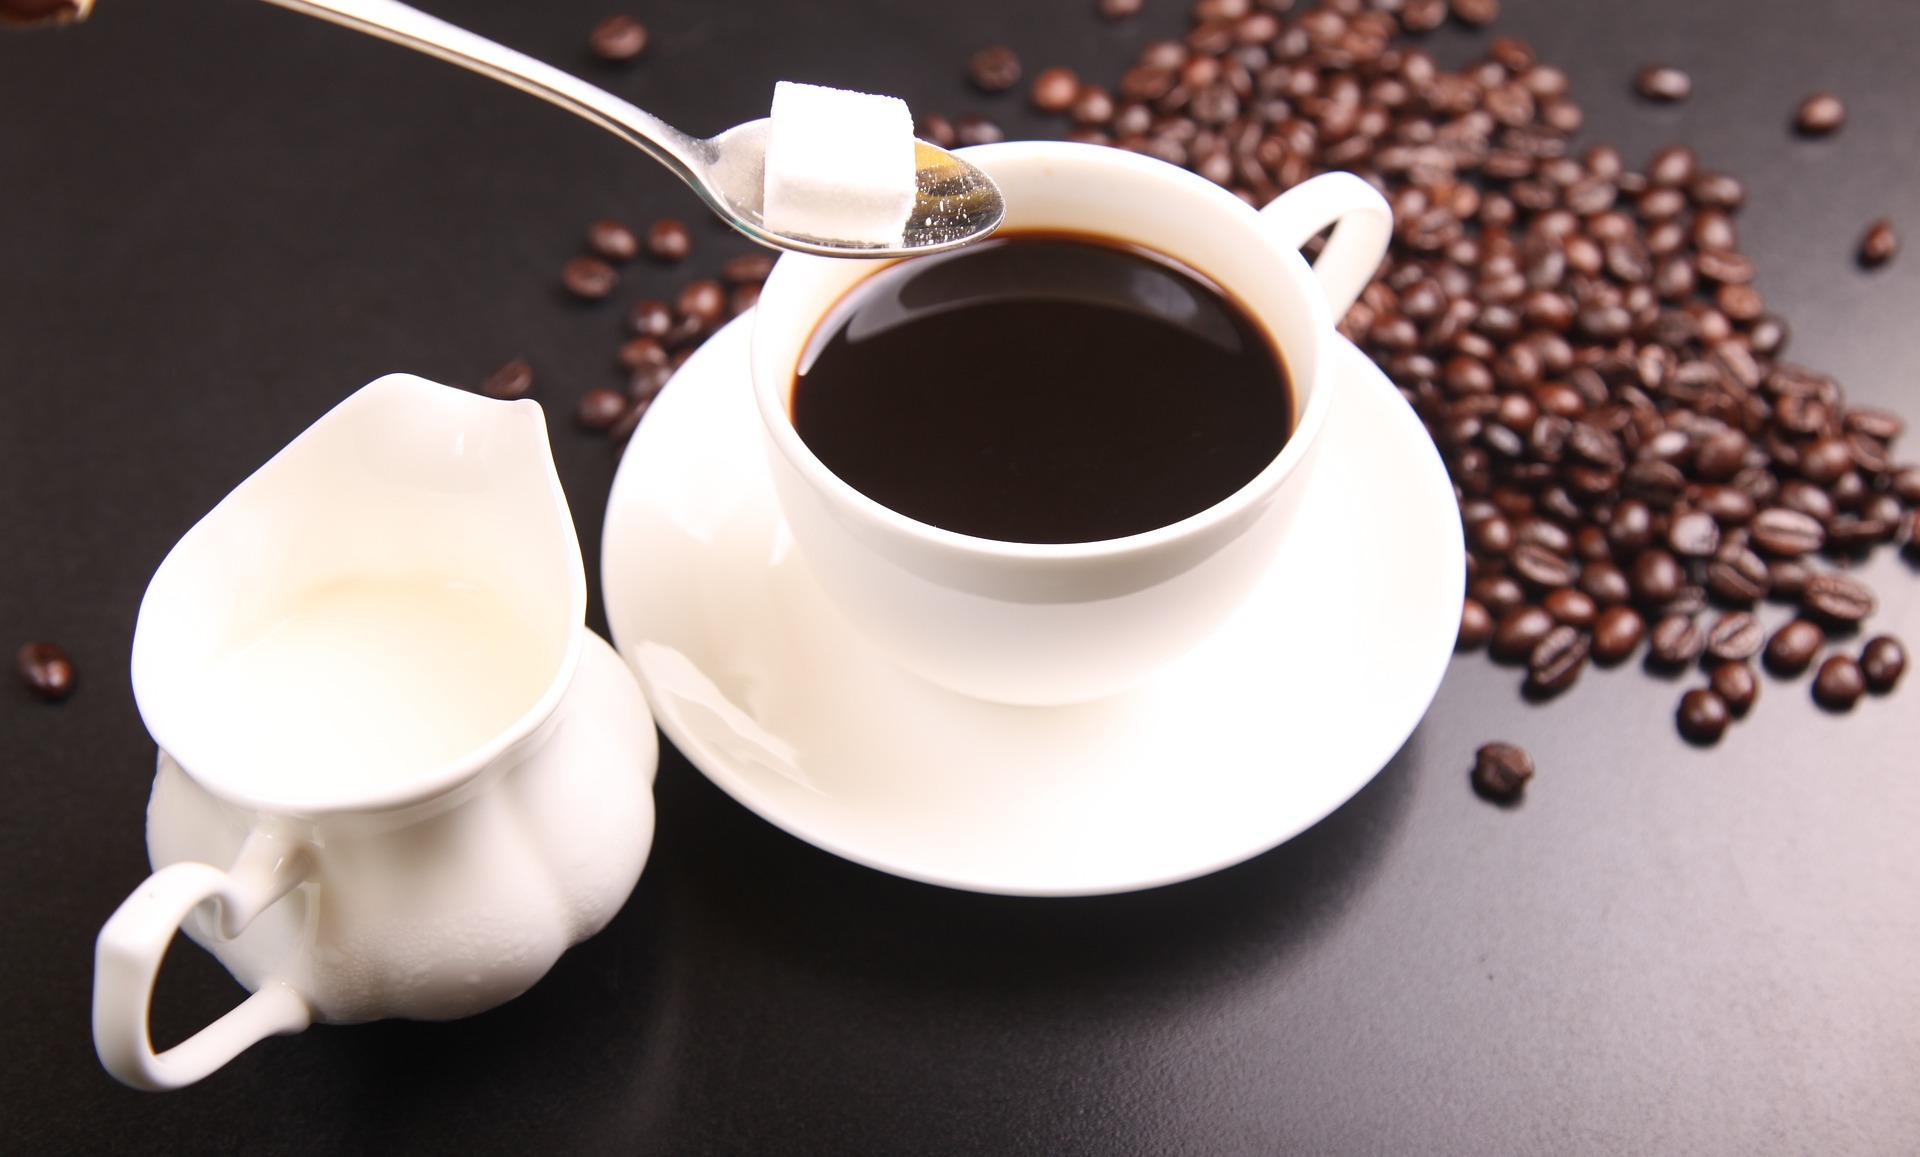 A black coffee in a cup and saucer, with coffee beans around.  A person is holding a spoon with a cube of sugar over the coffee, and there is a jug of milk to the side.  Our milk allergy solicitors are here to assist if you have been sold containing undeclared milk.